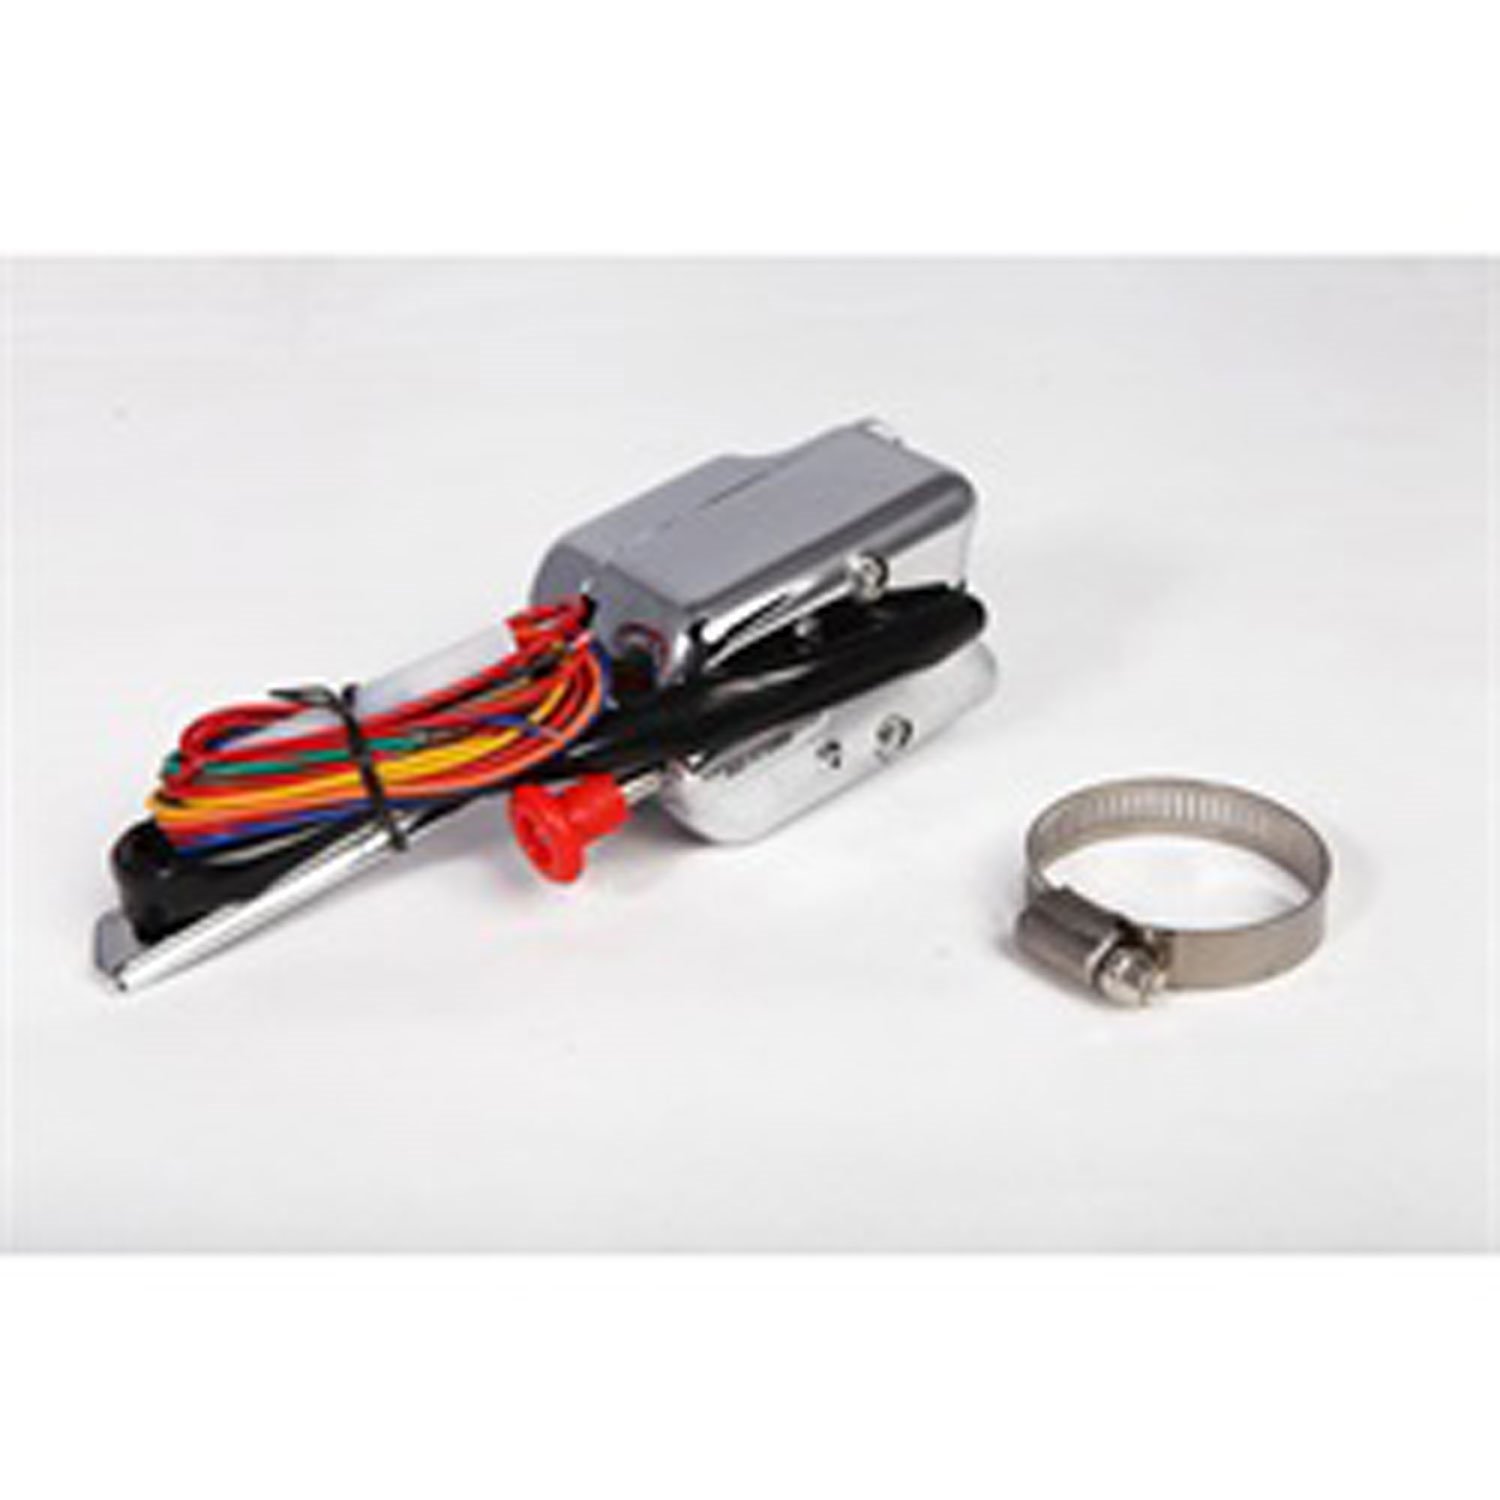 Chrome replacement turn signal switch kit from Omix-ADA includes wiring harness and built-i